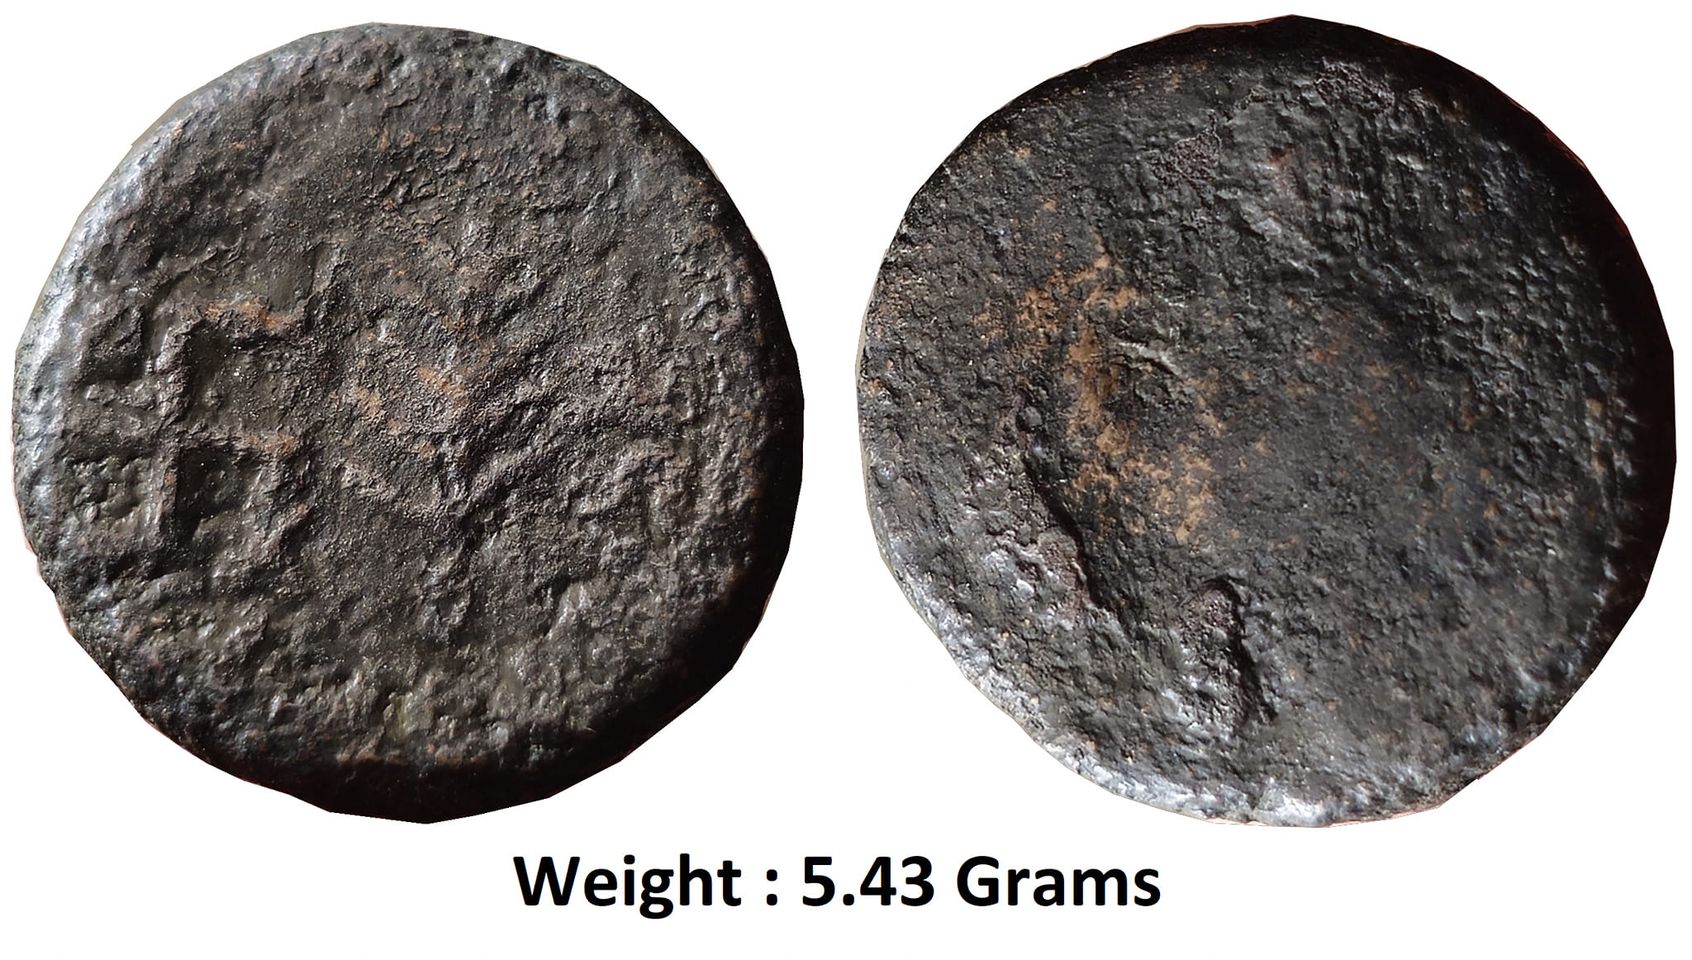 Tribal-Post Mauryan, Sibi Janapada (200 BC), Copper Unit,
Obv: Swastika & traces of tree in the center.
Rev: Traces of six-arched hill with crescent (chaitya) .
(Handa # Pl. XXXII- 5), Extremely Rare.

Note: Referred to in the Rigveda and the Aitareya Brahmana as the Shivas, the Sibis are amongst the earliest known tribes of ancient India. They are one of the many tribes described in these ancient texts as having been defeated by the Trtsu-Bharata (Puru) king Sudas in the famous Battle of the Ten Kings, or the Dasrajya Yuddha, which is recorded to have taken place somewhere near the rivers Vipas (Beas) and Purushni (Ravi). They feature prominently in the Mahabharata, with their king Usinara having attended the swayamvara of Draupadi and later fighting alongside the Pandavas in Kurukshetra where he was killed by Dronacharya. They also appear in the writings of Patanjali and Katyayana, and their cities, Arithapura and Jetuttara, can be found in Buddhist texts such Mahamayuri and the Jatakas. In the 10th century AD, Jetuttara is referred to by Al-Beruni as Jattaraur in Mariwar, which is present-day Mewar, and it is here, at Nagari and Chittorgarh, that the coins of this illustrious tribe have been found.